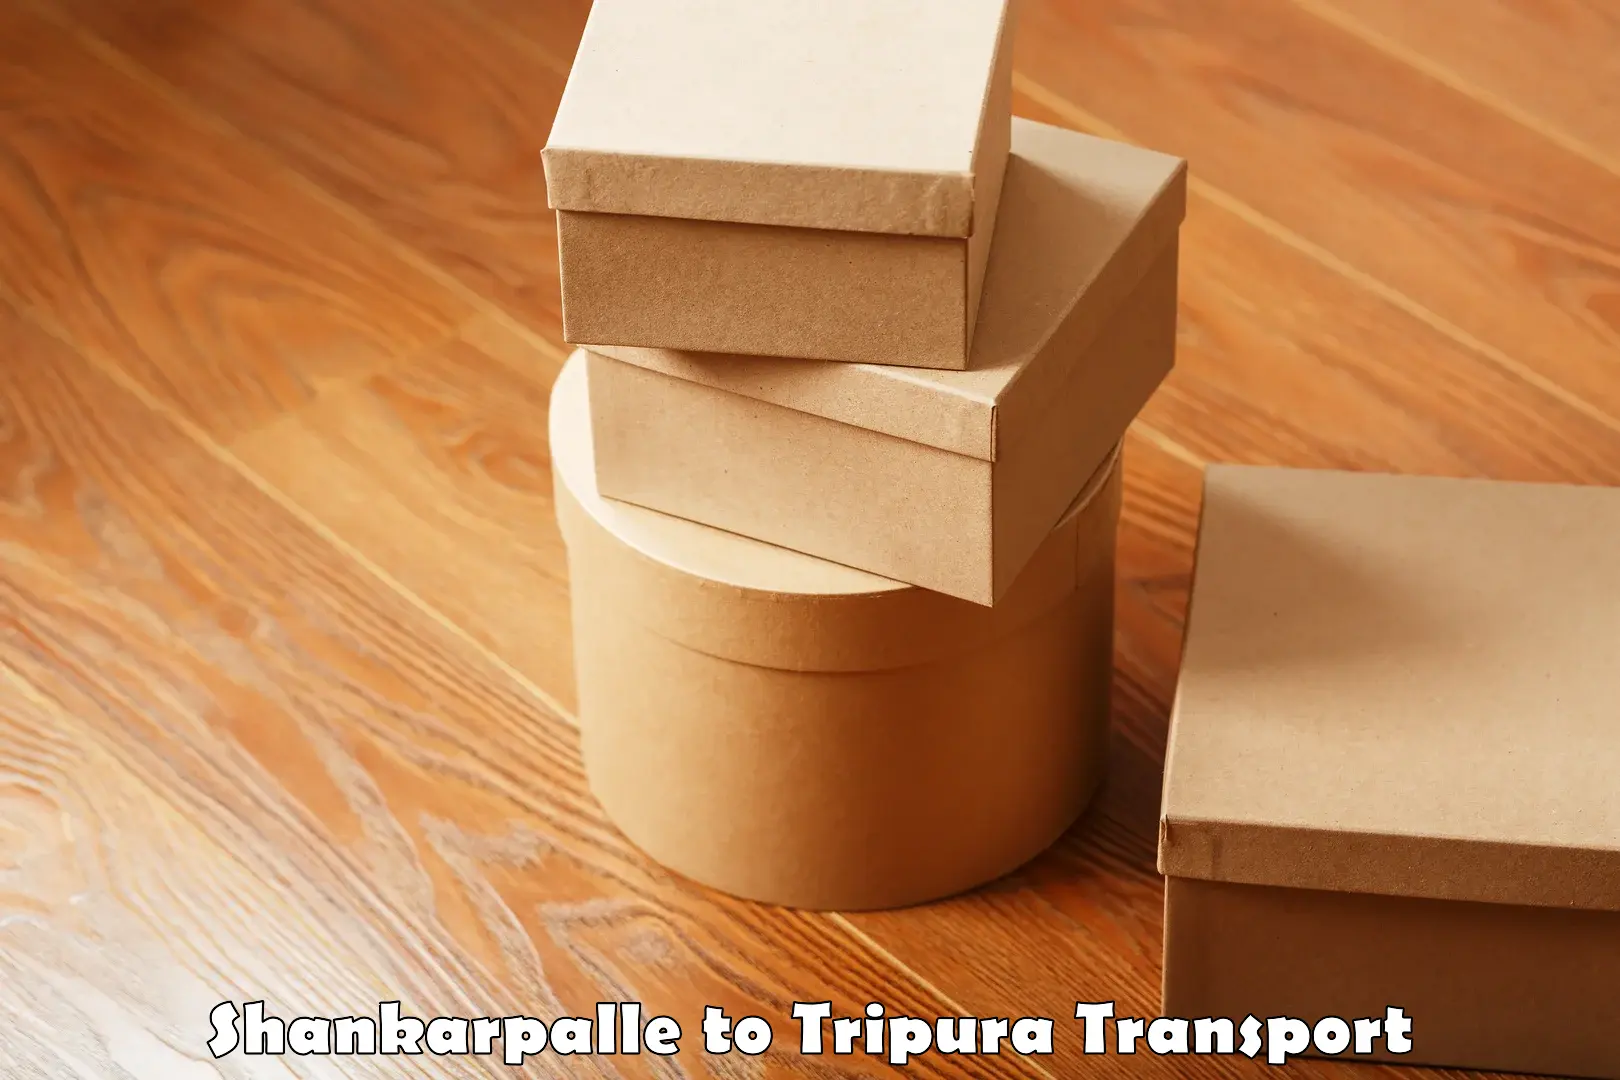 Package delivery services Shankarpalle to Udaipur Tripura